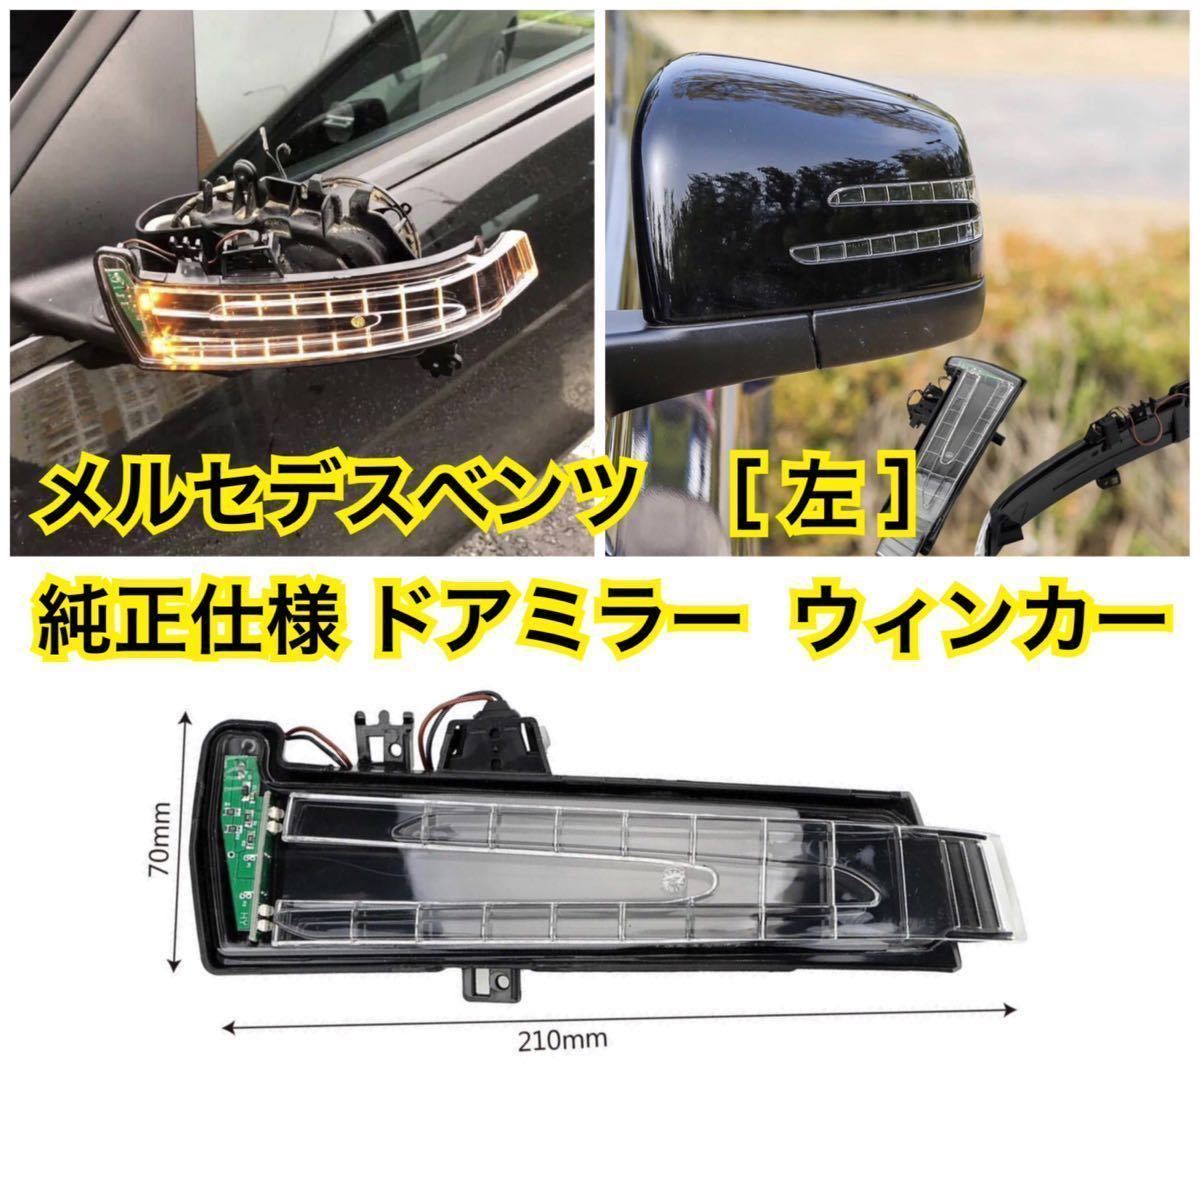  immediate payment * new goods * Mercedes Benz left door mirror winker LED original specification W176/W246/W204/W212/W218/C117/C118 /X156 after market high quality postage included *